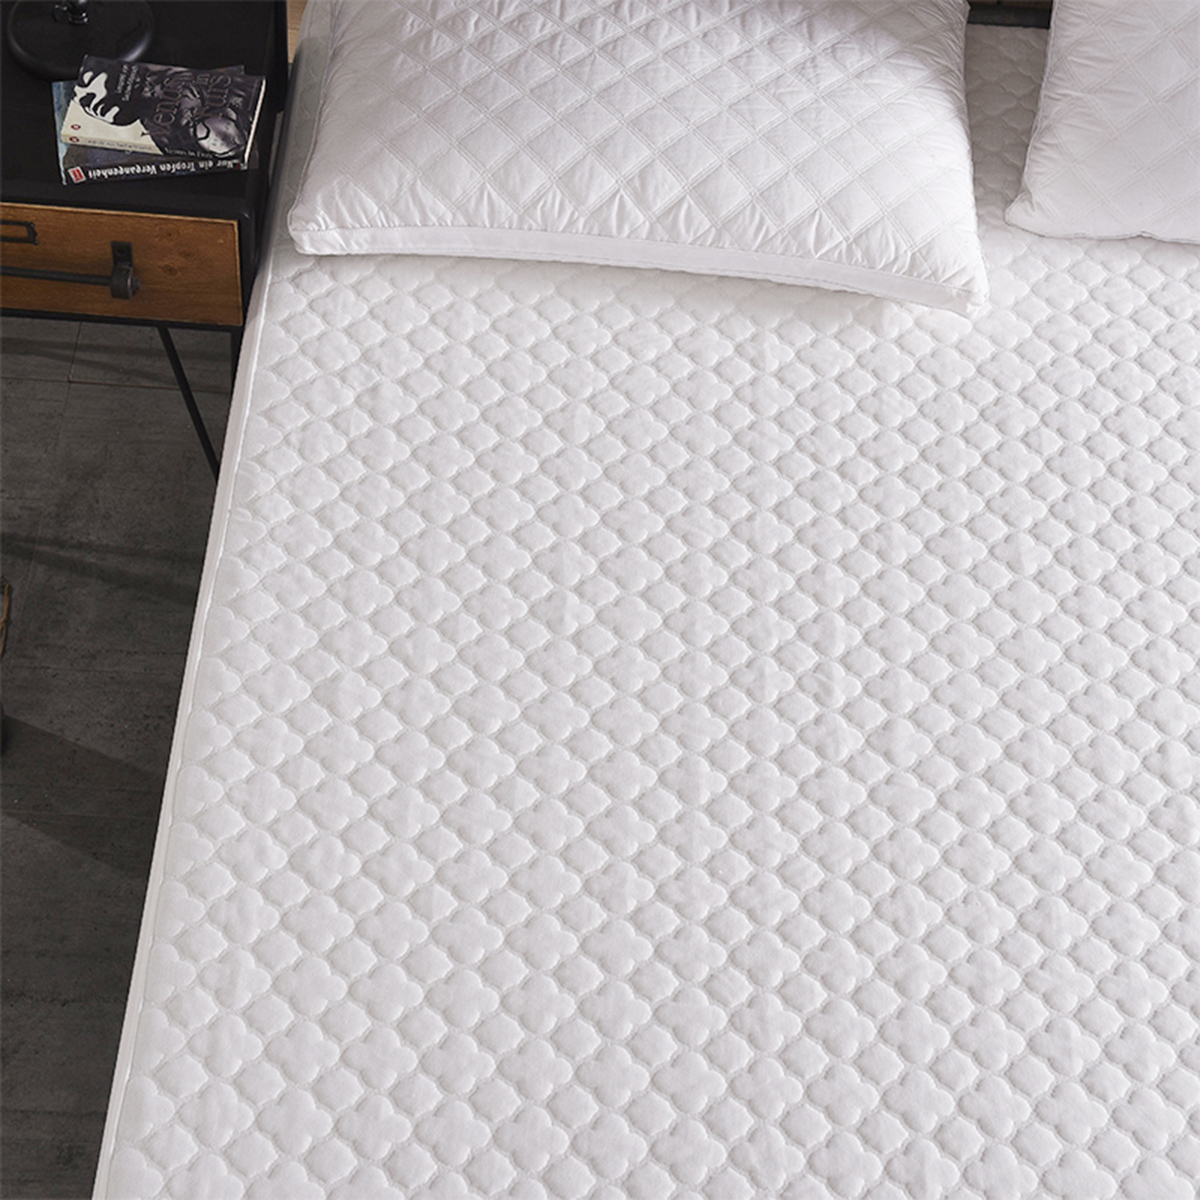 Multi-size-Washable-White-Quilted-Mattress-Covers-Waterproof-Protector-Pad-With-Tightly-Elastic-Band-1692754-15